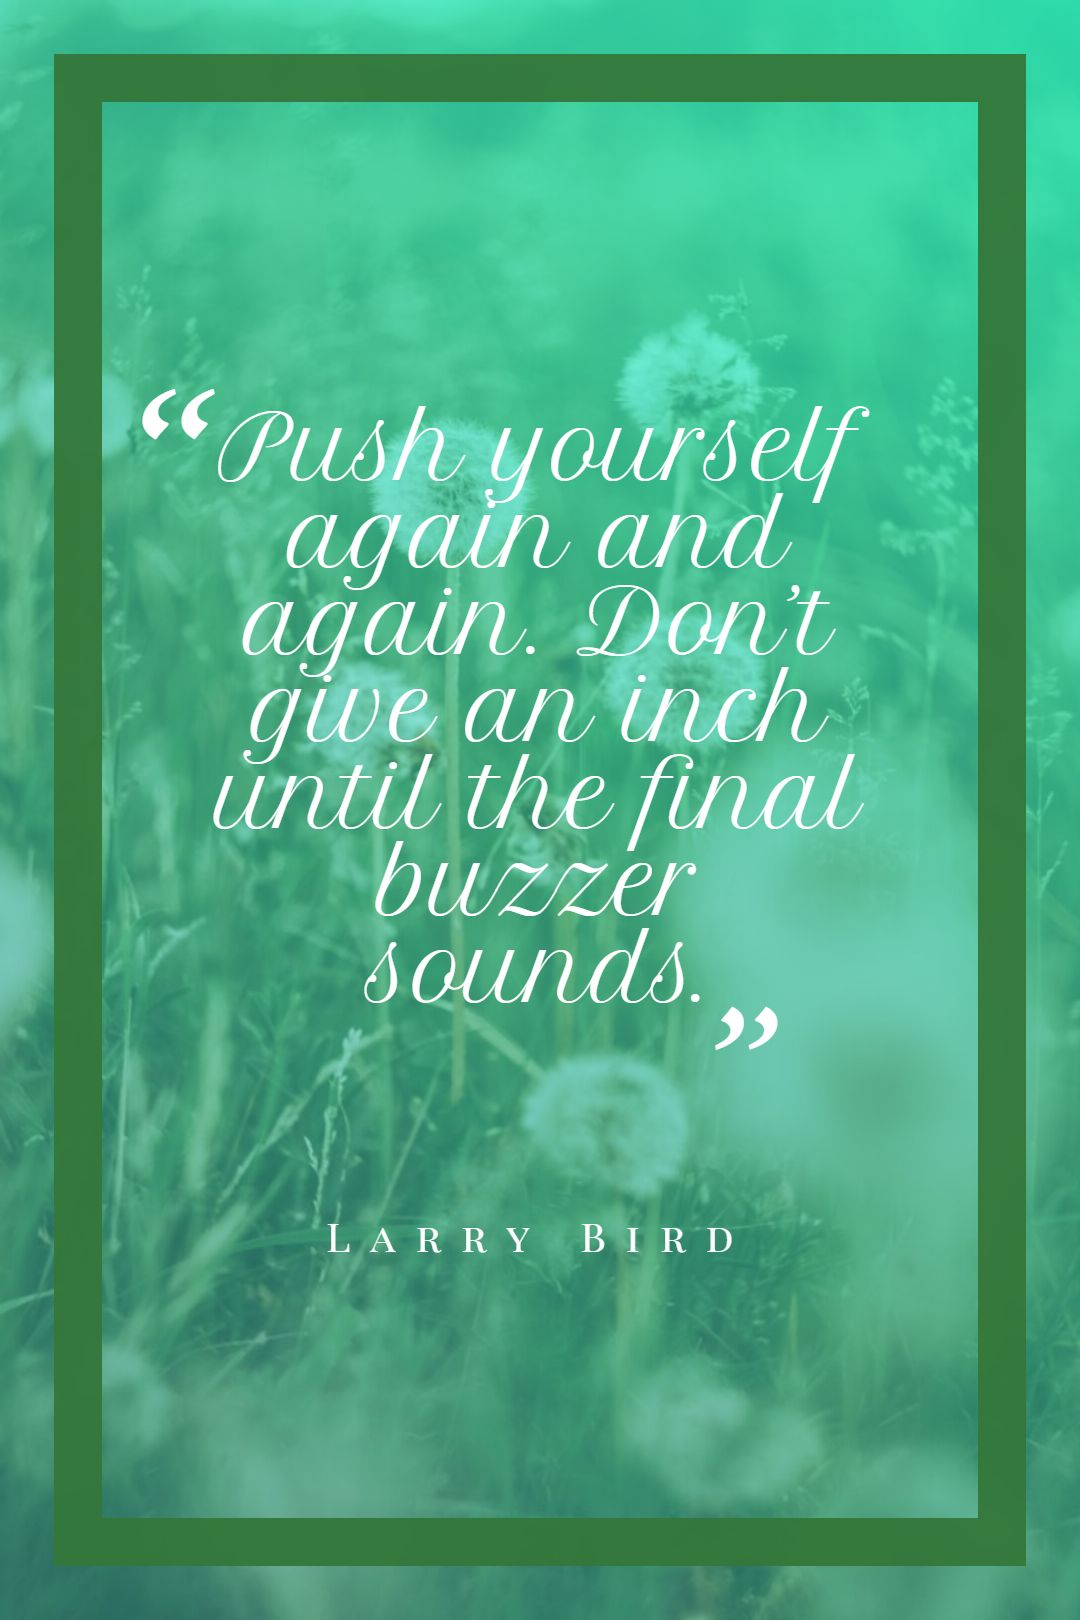 Push yourself again and again. Don’t give an inch until the final buzzer sounds.